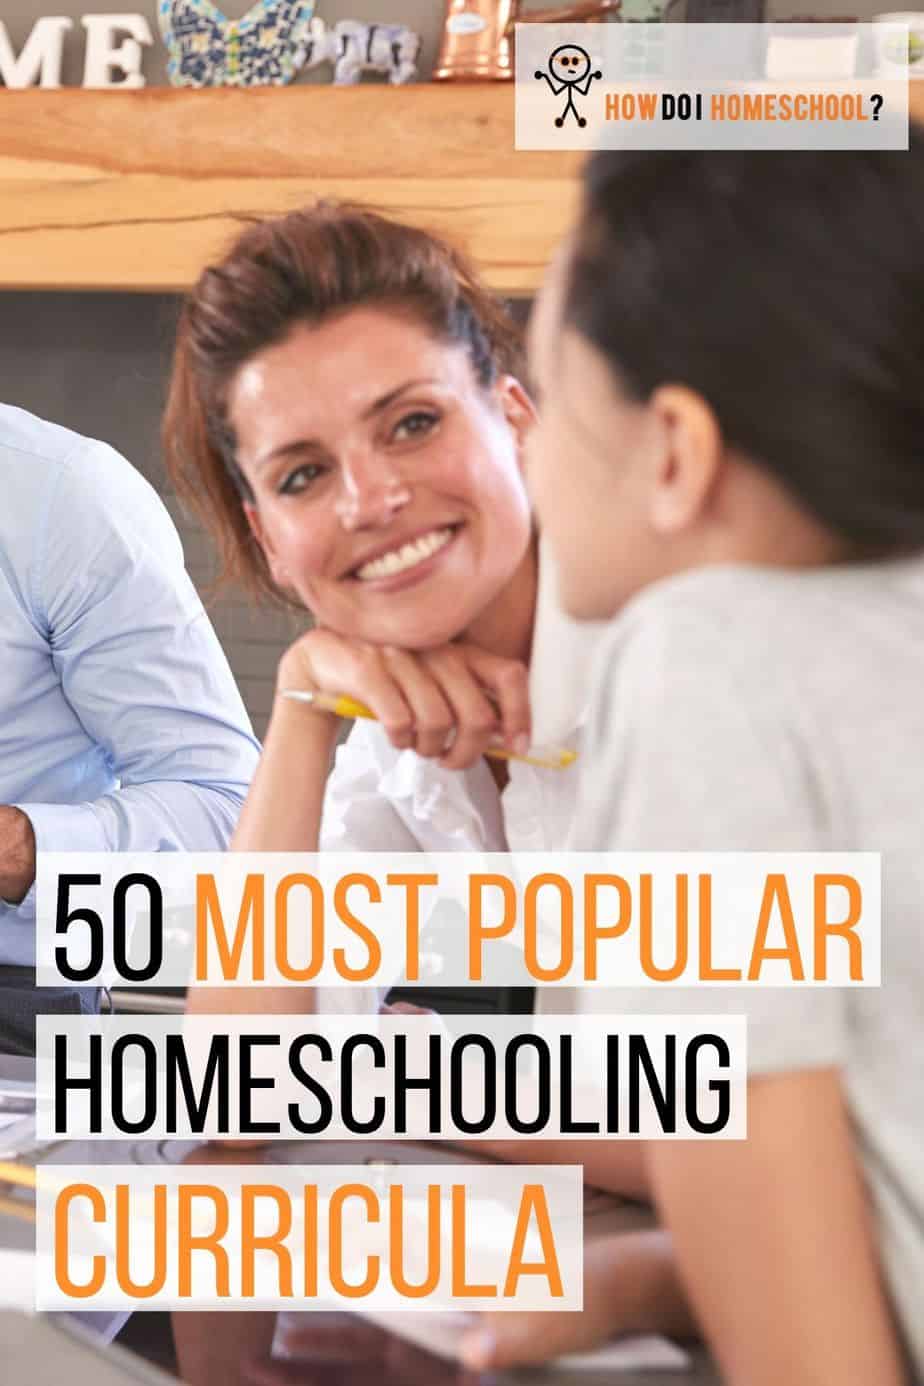 50 Most Popular Homeschooling Curriculum in 2020. Check out some great programs available today. #besthomeschoolcurriculum #tophomeschoolcurriculum